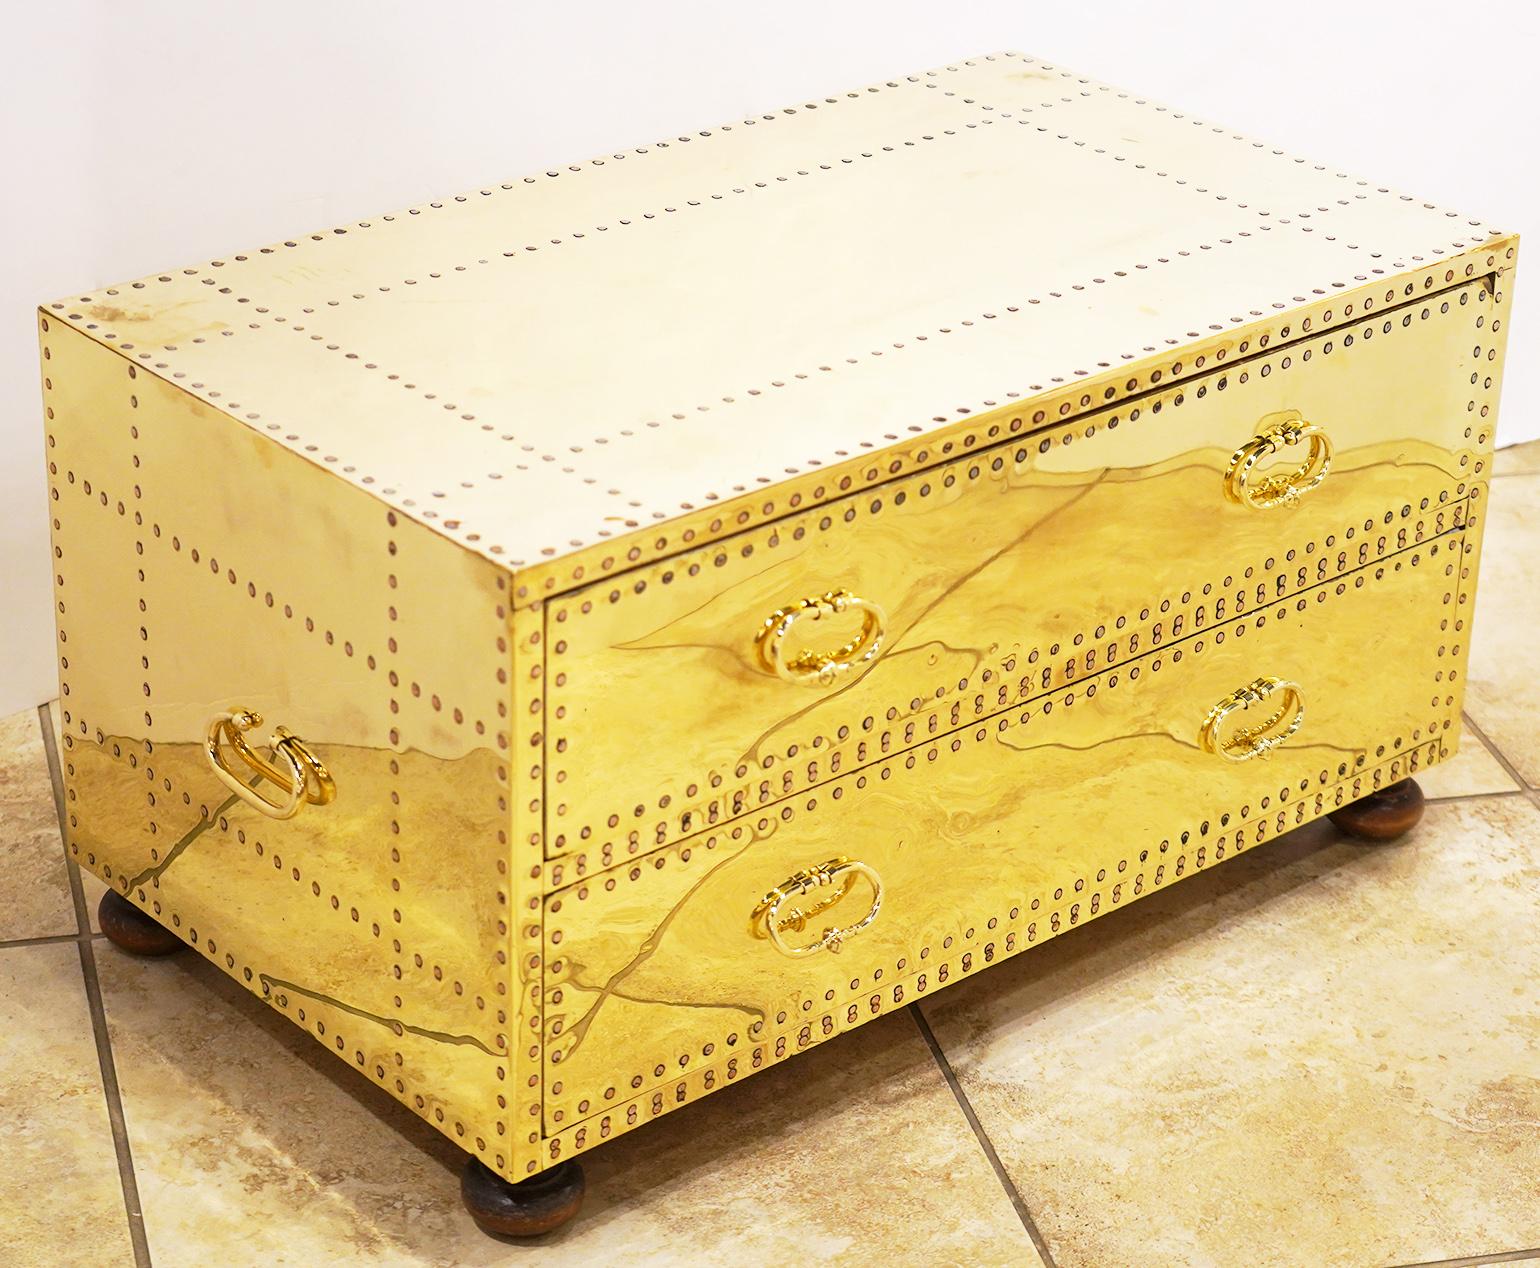 Spanish Pair of Versatile Polished Brass Clad Two-Drawer Chests by Sarreid, Spain